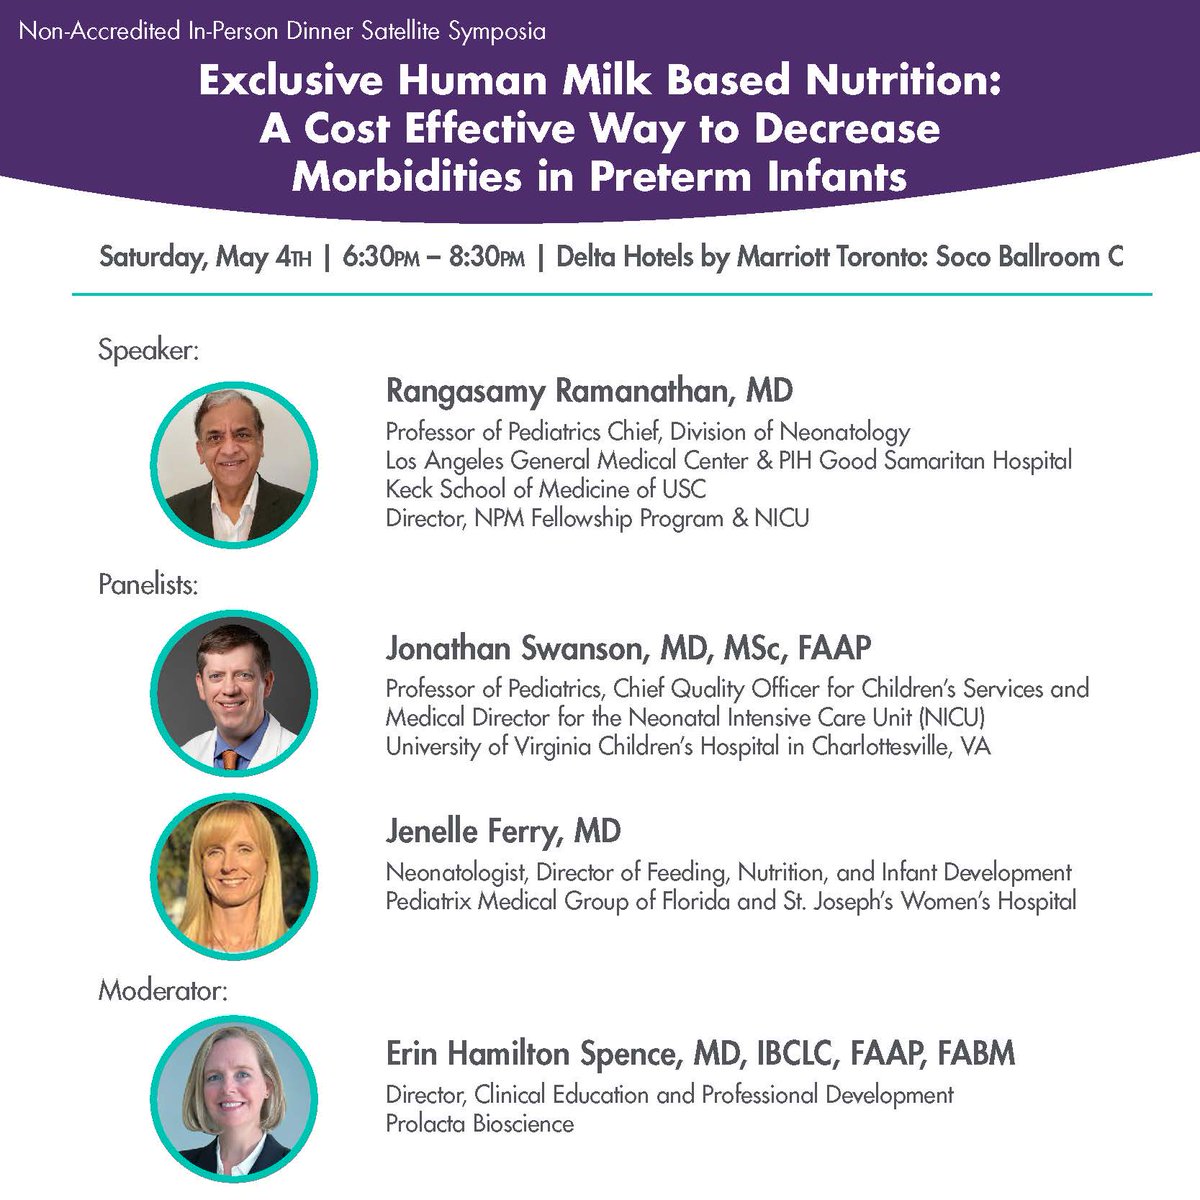 Attending #PAS2024? Don't miss our dinner symposium discussing cost-effective ways to decrease morbidities in preterm infants featuring Dr. Rangasamy Ramanathan. Register: hubs.li/Q02vGC6f0